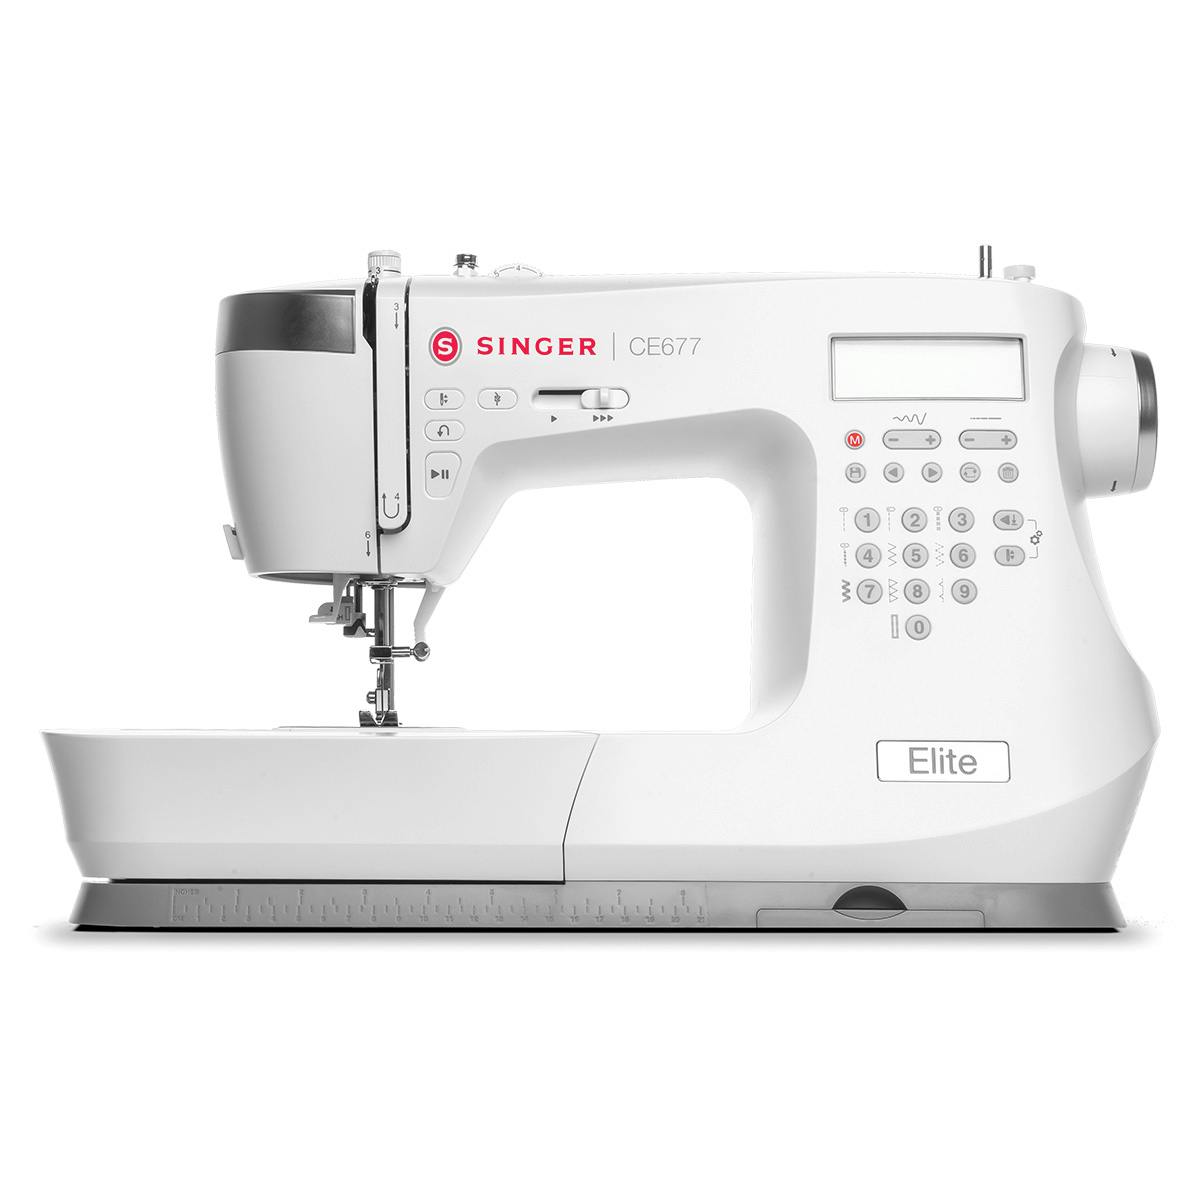 Machine Overview from Singer Quantum Stylist™ Sewing Machine Model